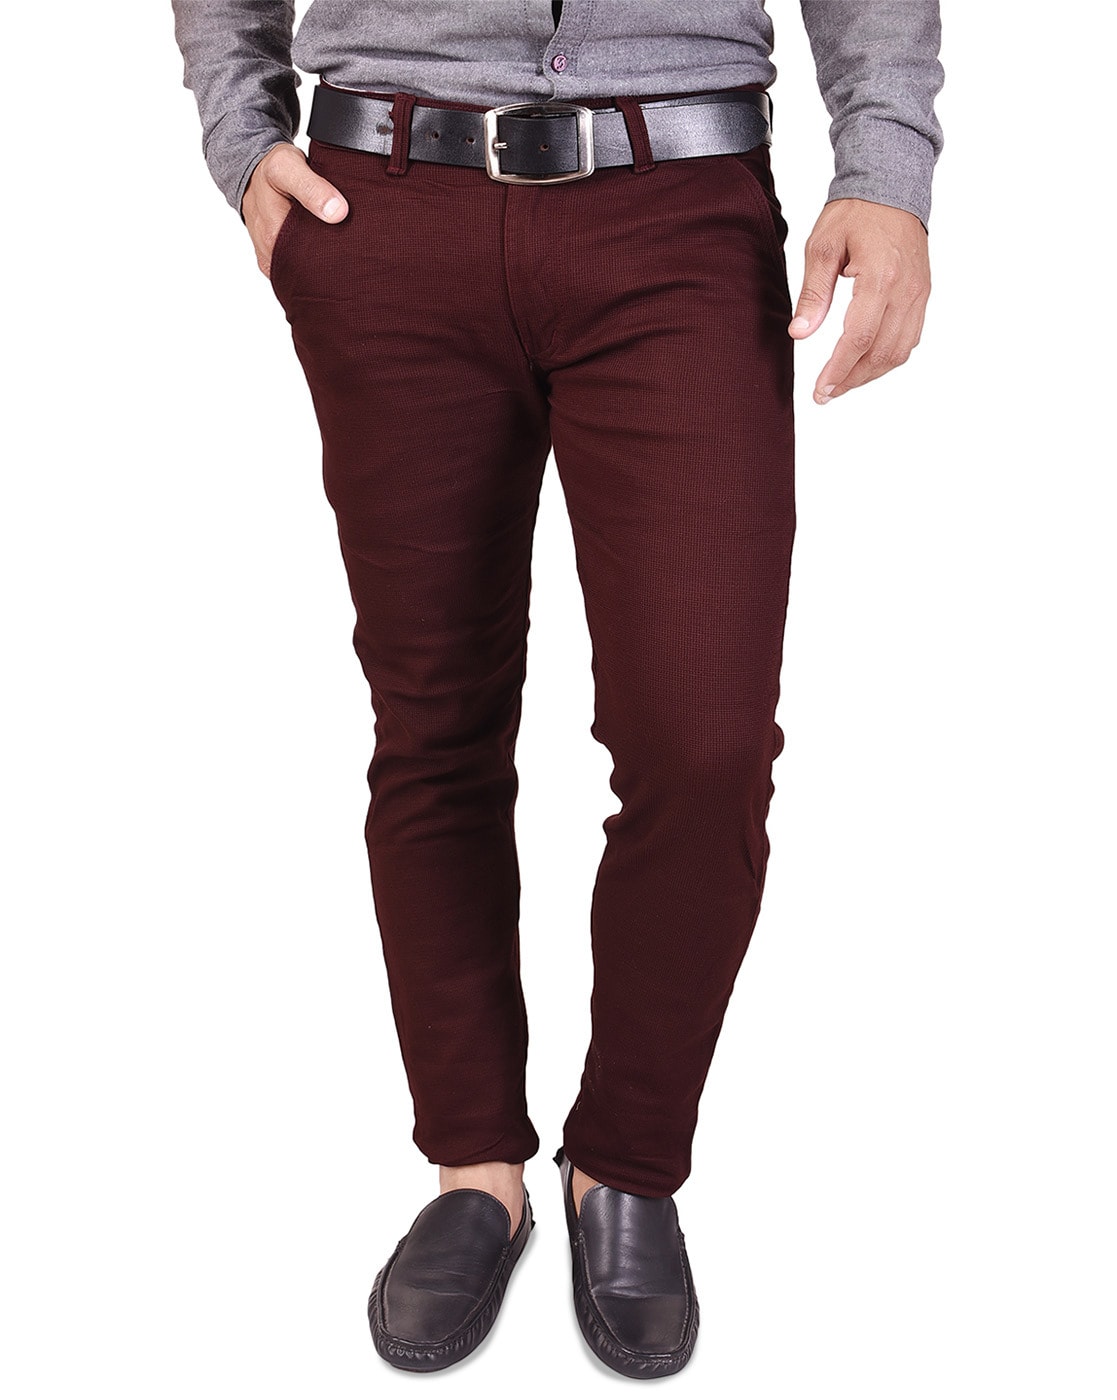 Casual Red and Maroon color Rayon fabric Jeggings : 1871662